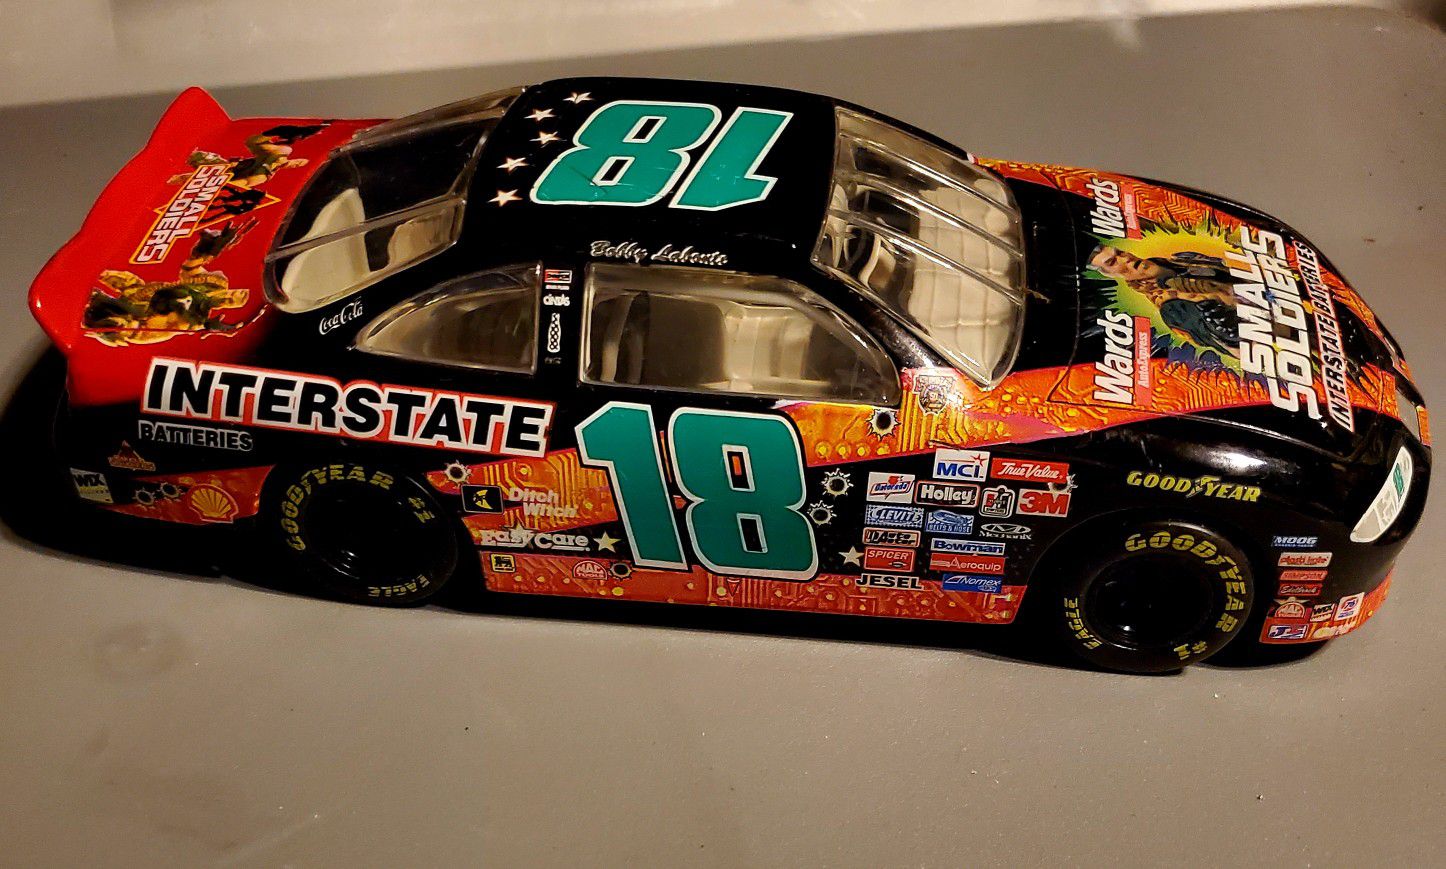 Winners Circle NASCAR #18 Bobby Labonte Interstate Small Soldiers Scale 1/24 Die Cast Collectibles.
